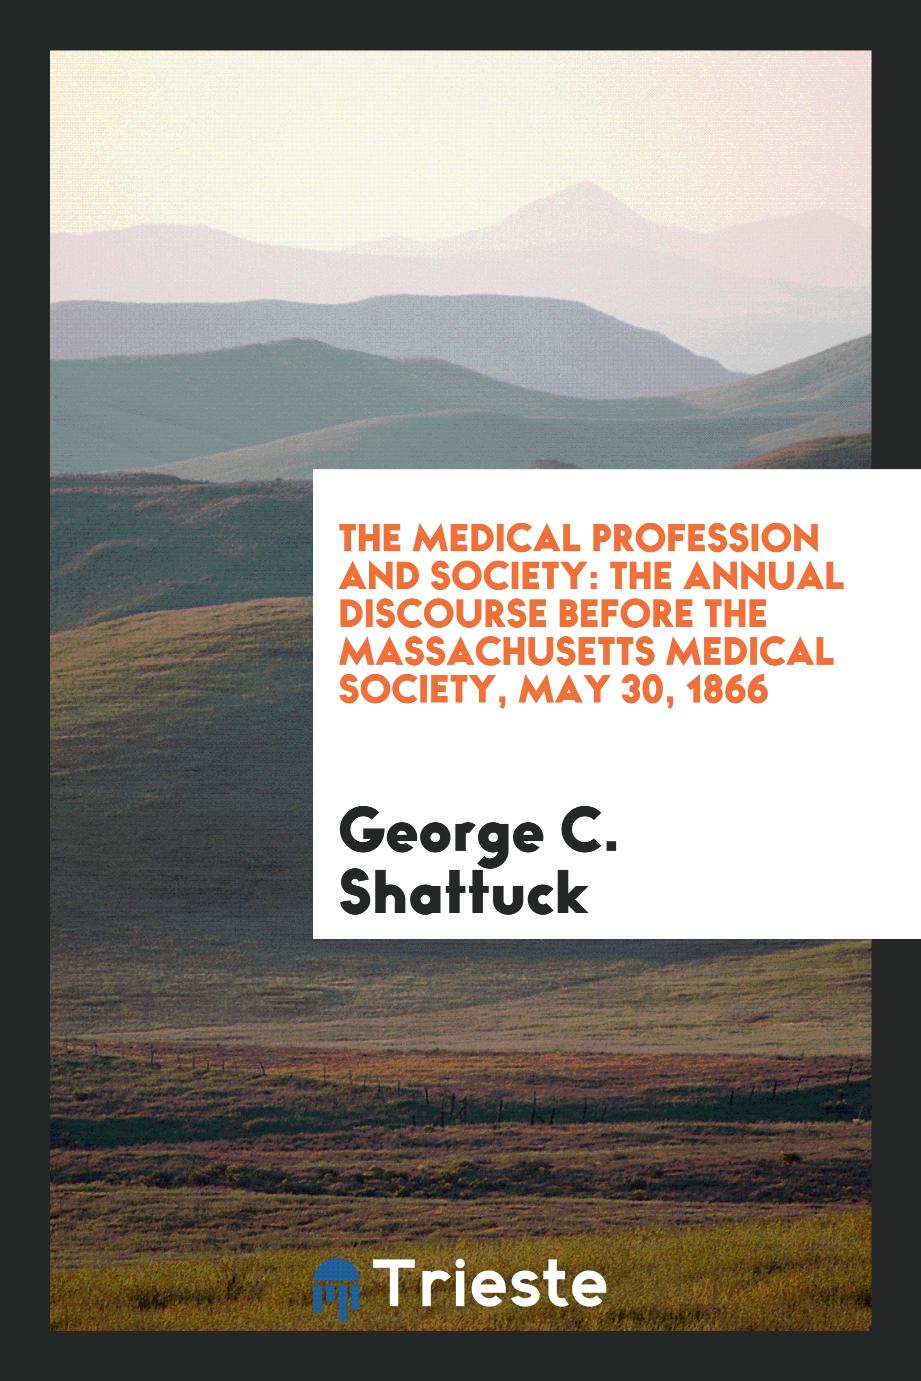 The Medical Profession and Society: The Annual Discourse Before the Massachusetts Medical society, may 30, 1866